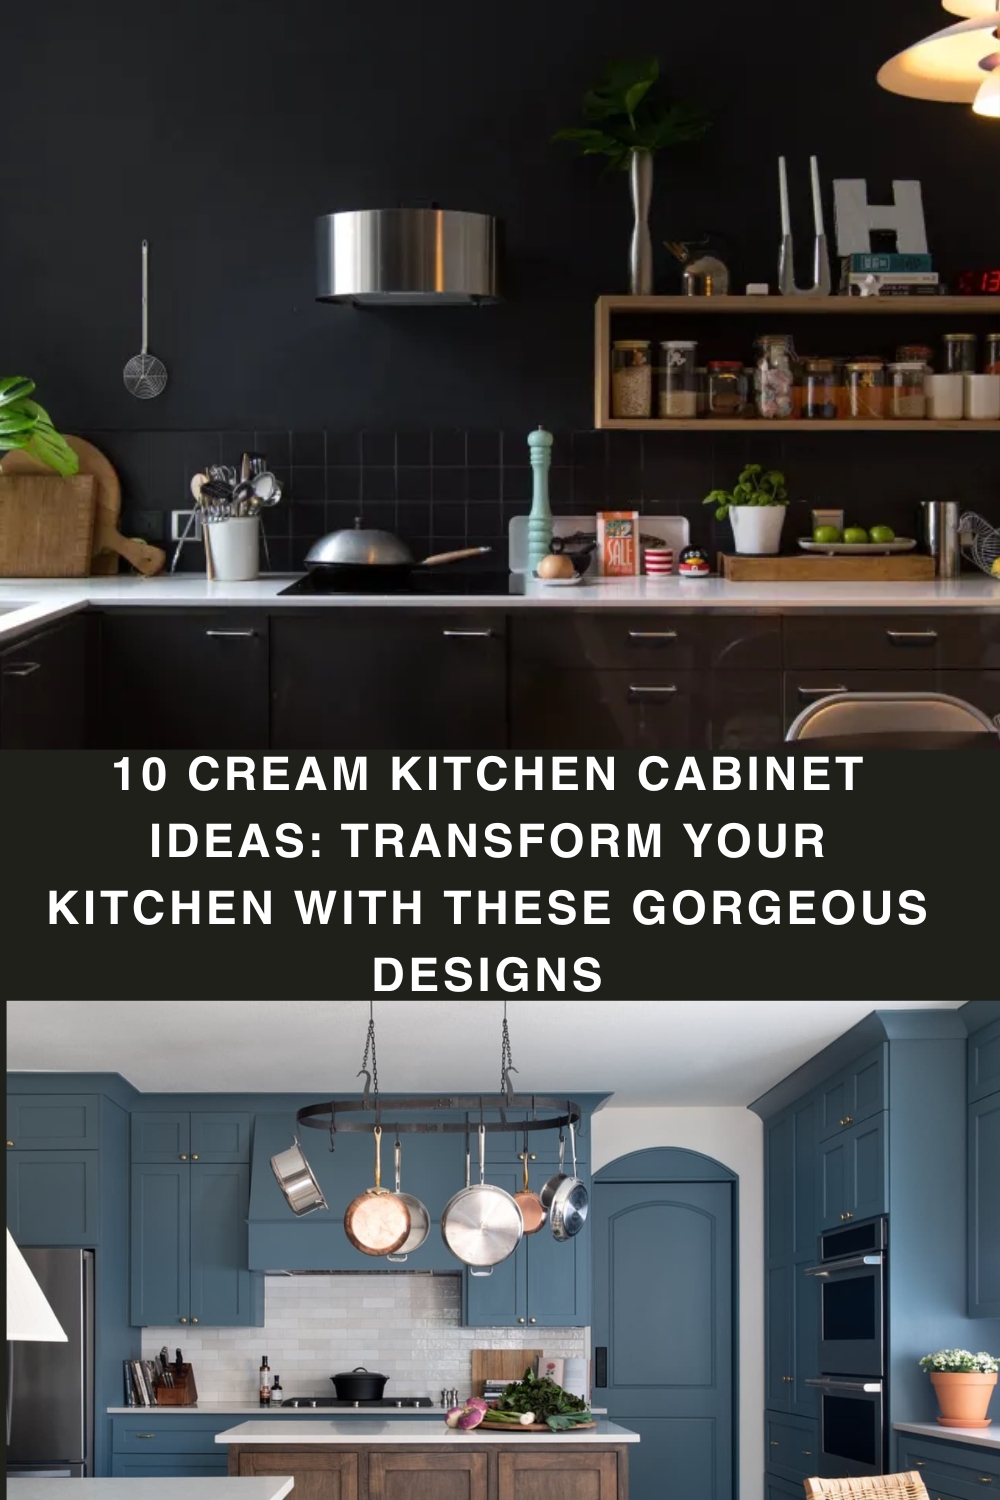 10 Cream Kitchen Cabinet Ideas: Transform Your Kitchen with These Gorgeous Designs pin